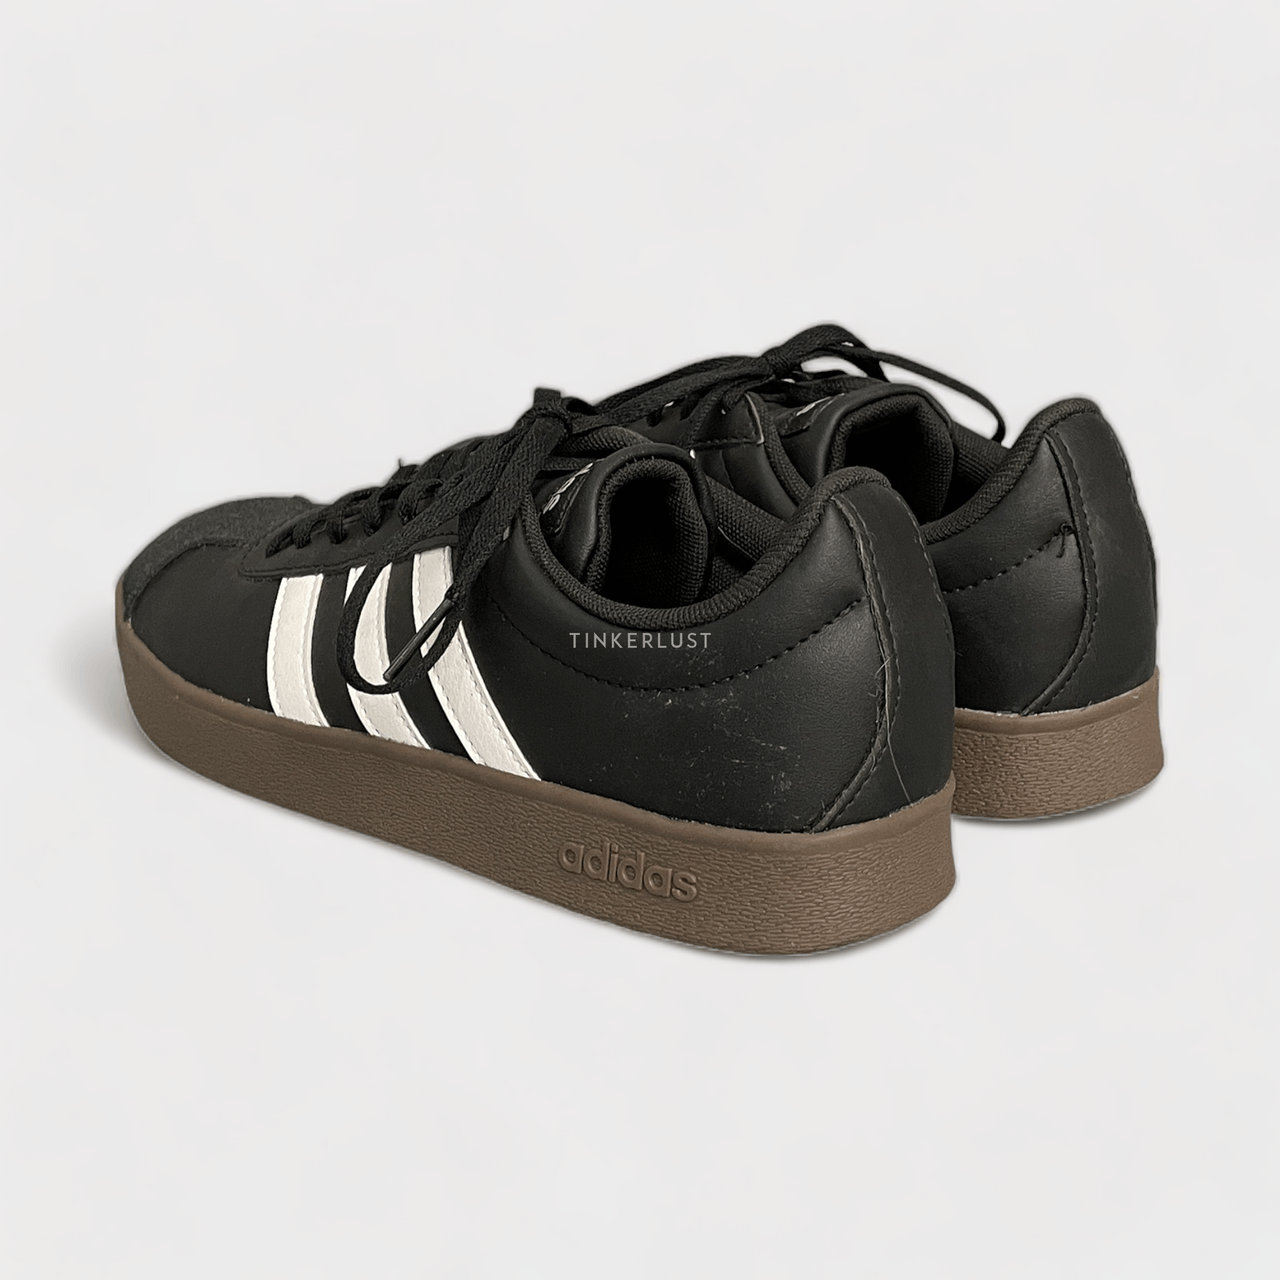 Adidas VL Court Base Sneakers